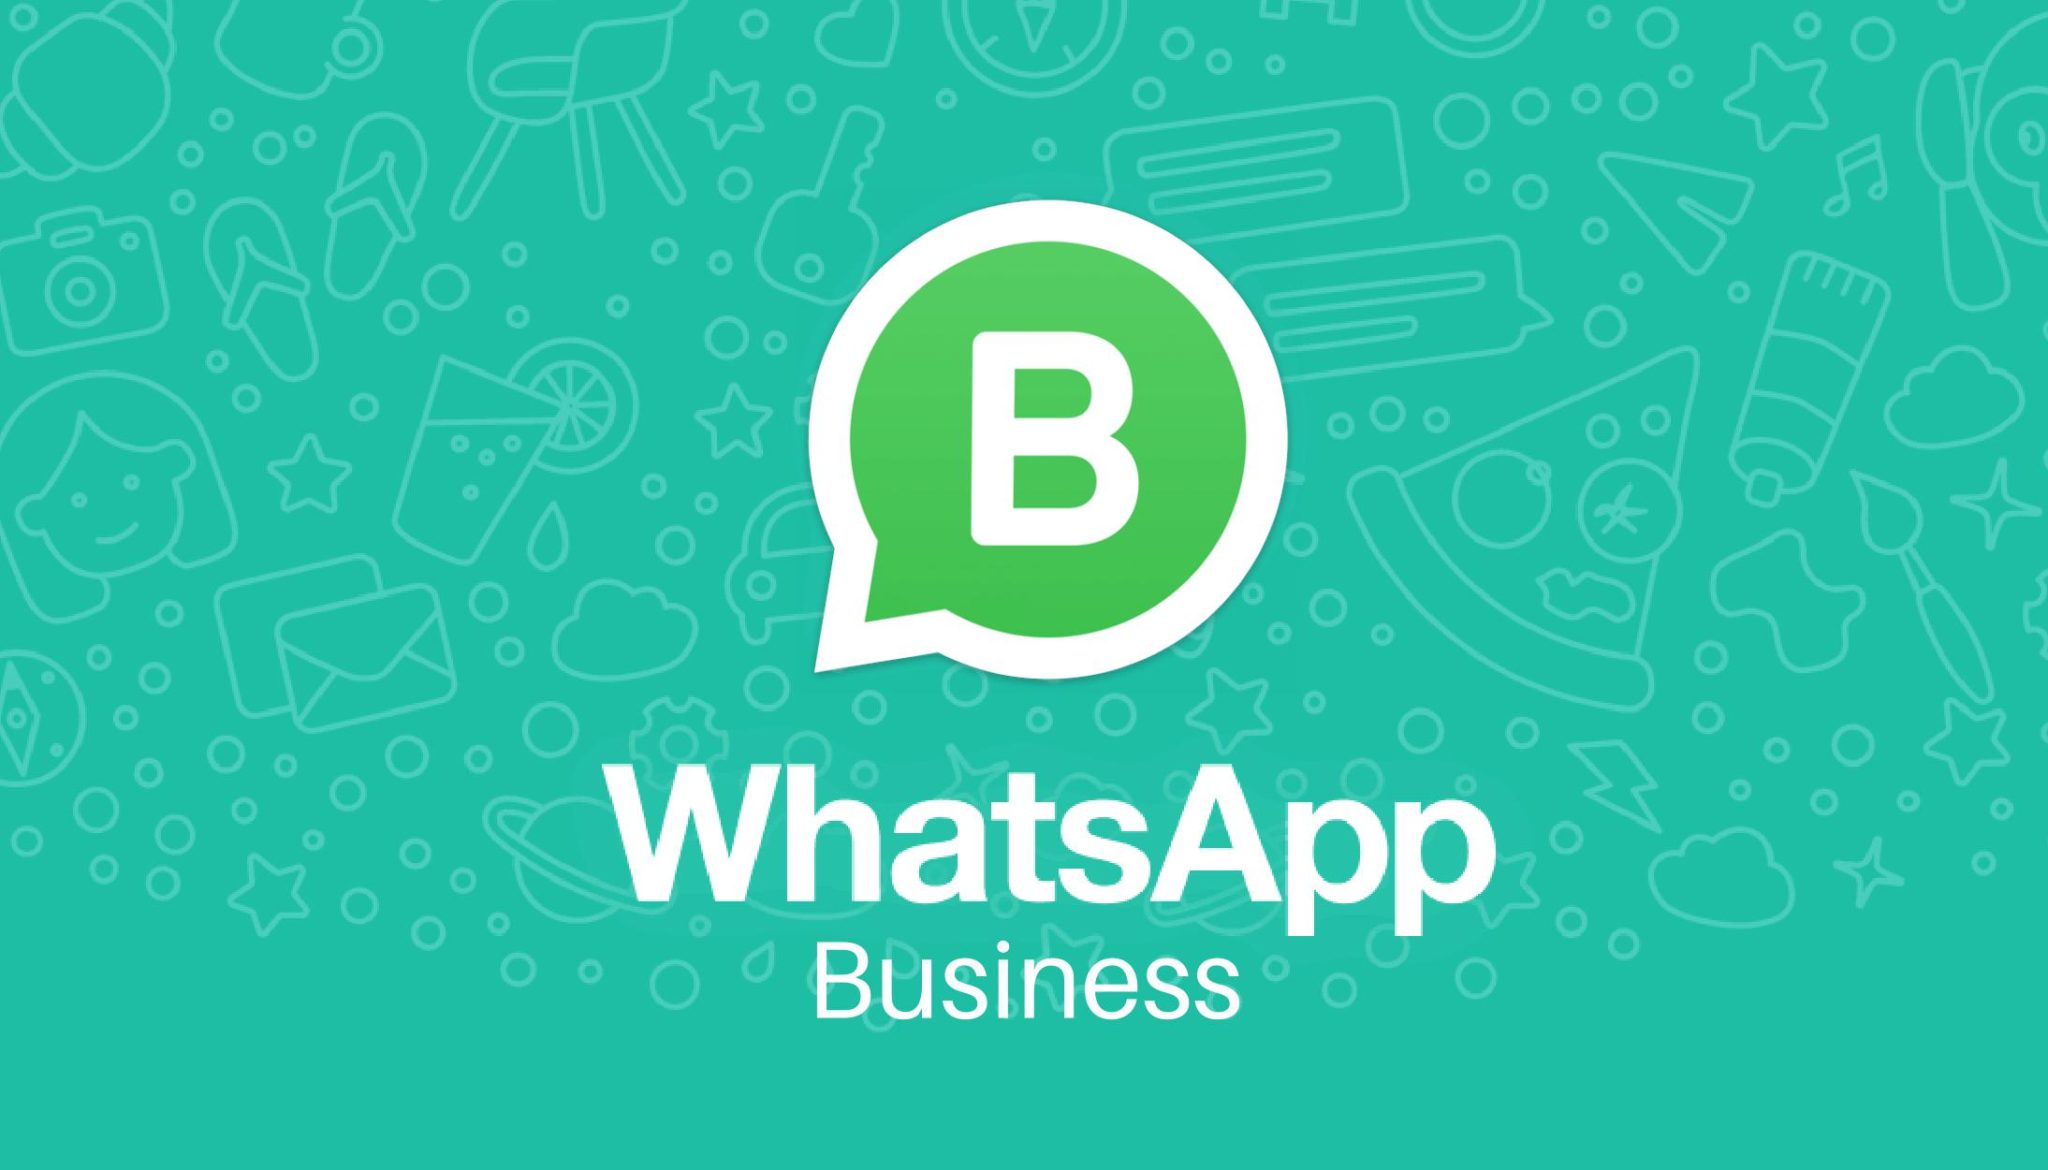 WhatsApp Is Now a Shopping App As Well? New Feature Updates For The Business Accounts In WhatsApp.